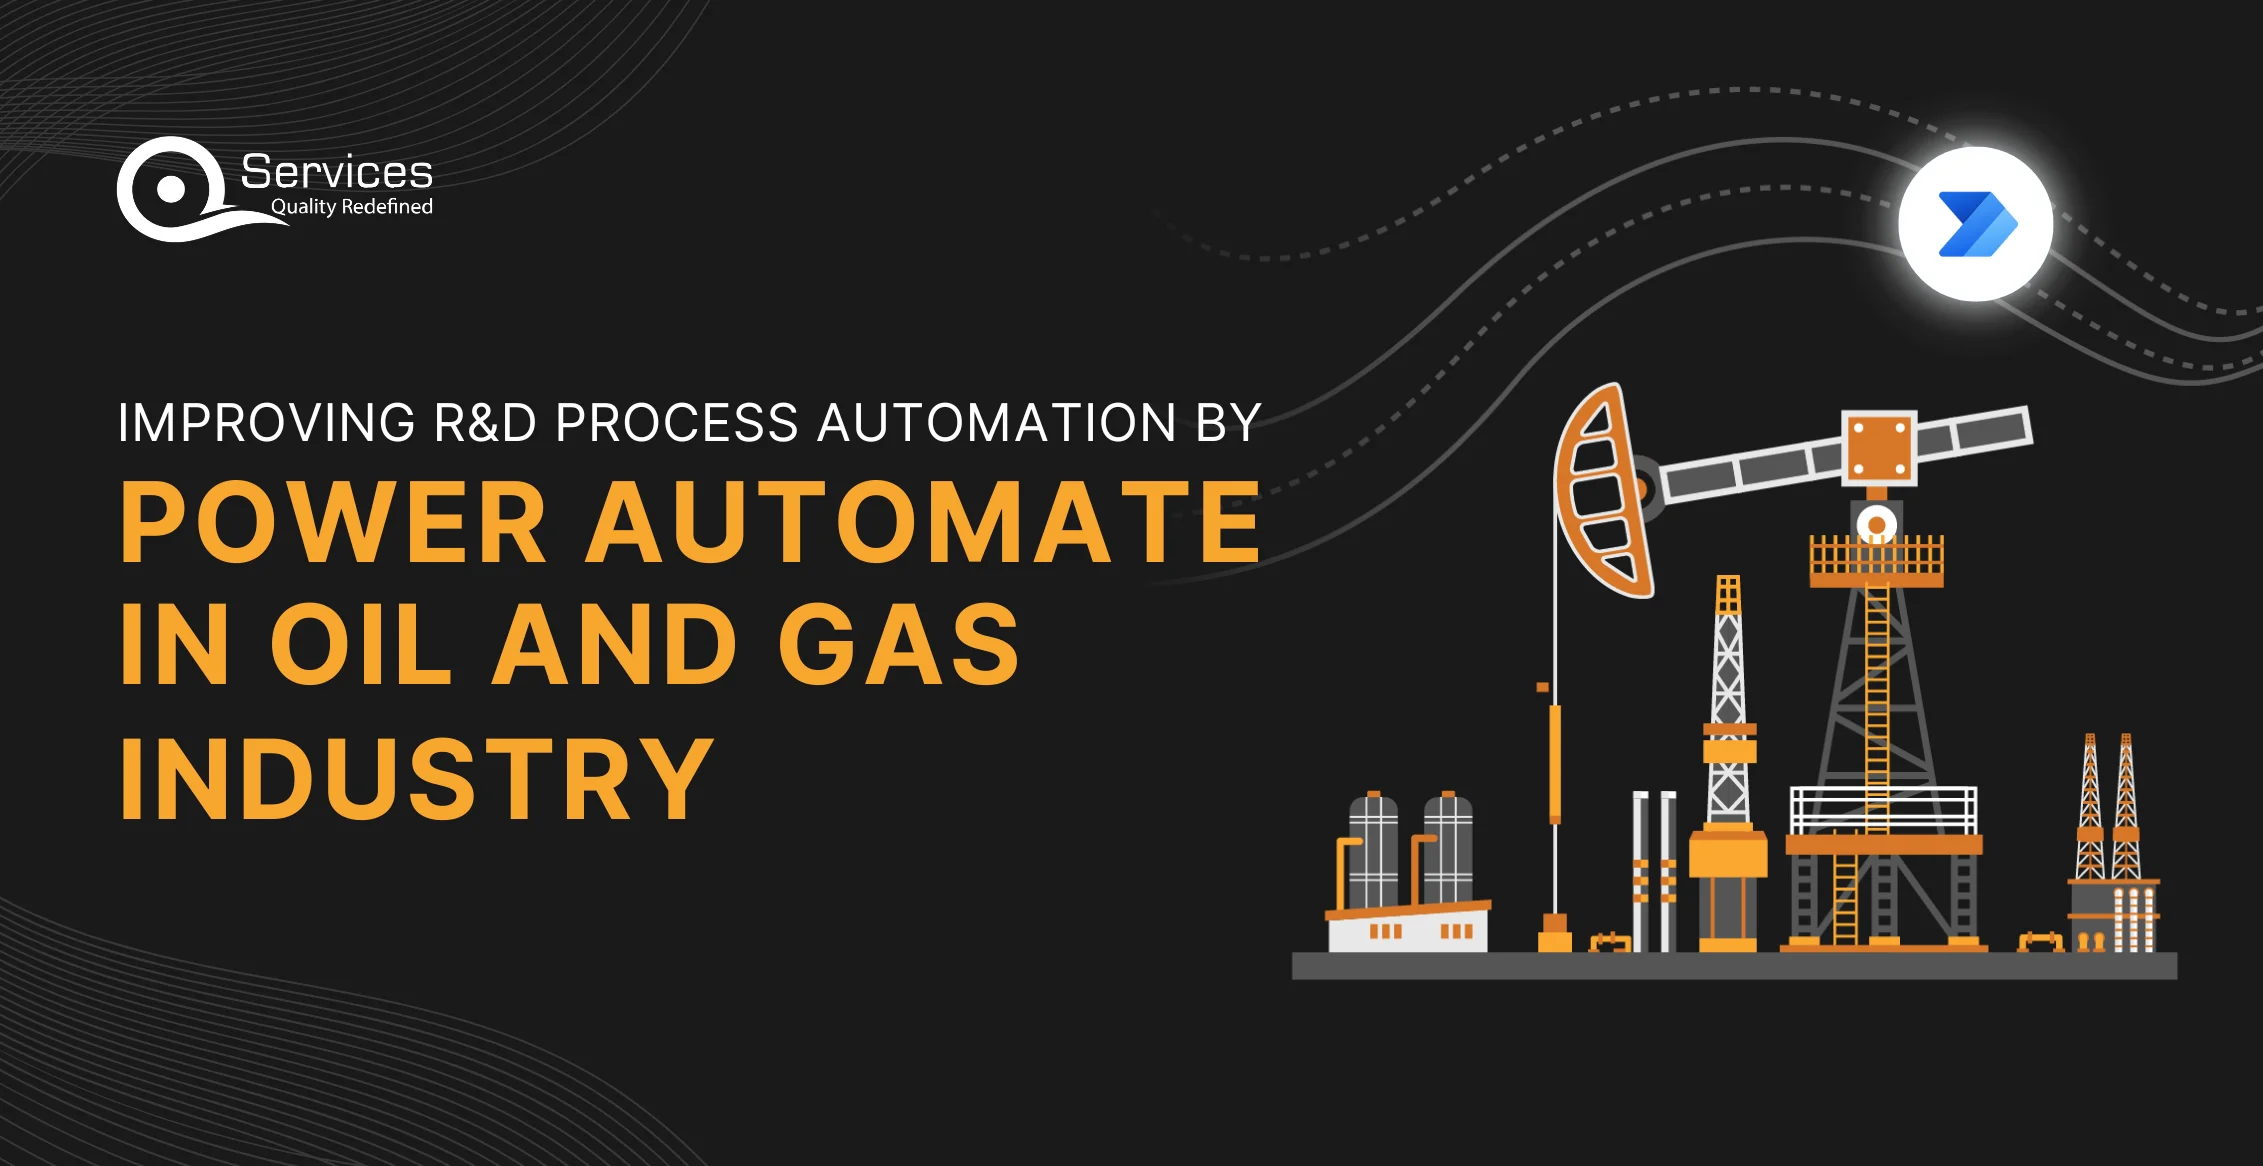 Improving R&D Process Automation by Power Automate in Oil and Gas Industry